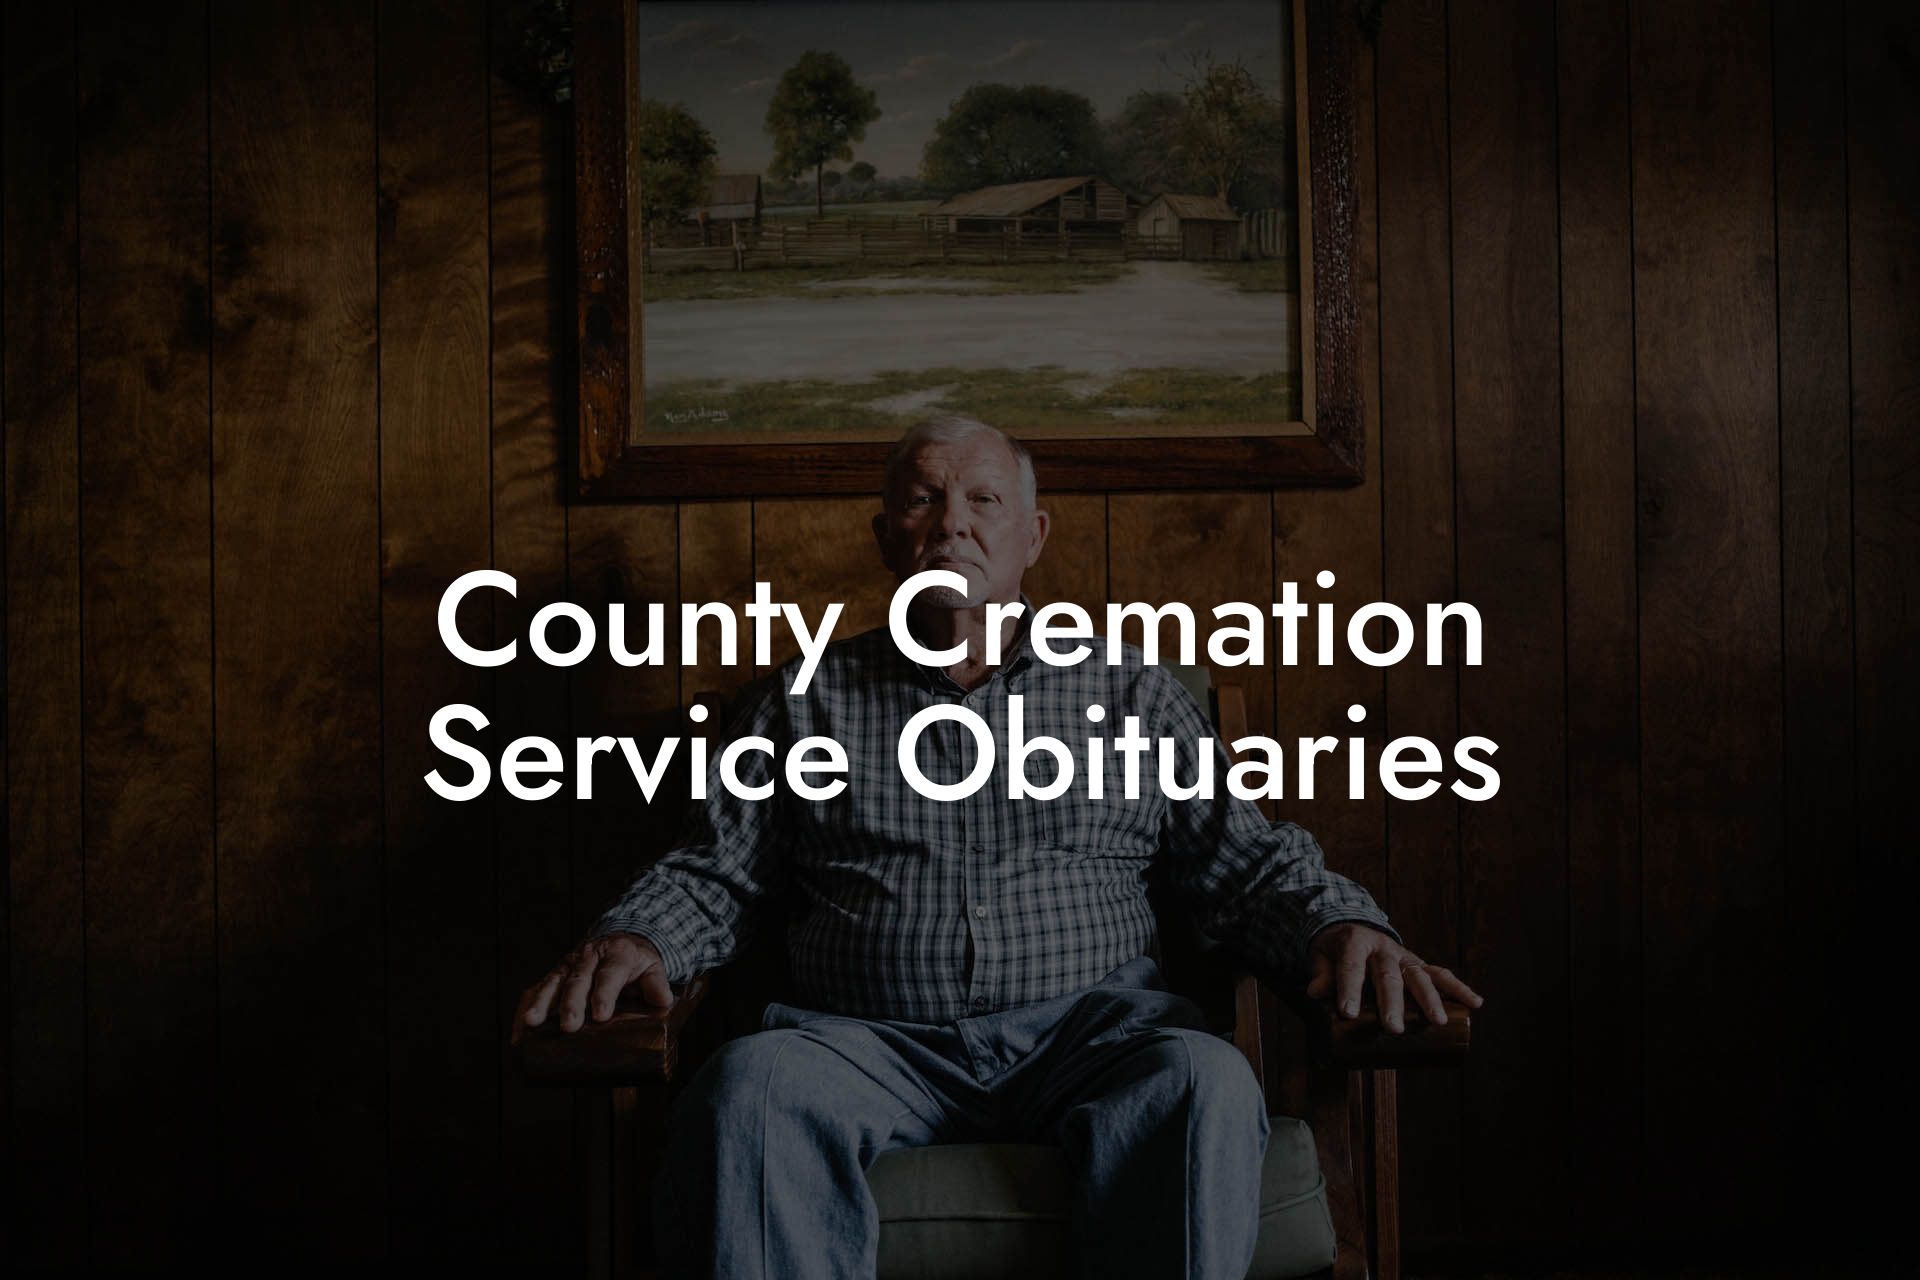 County Cremation Service Obituaries